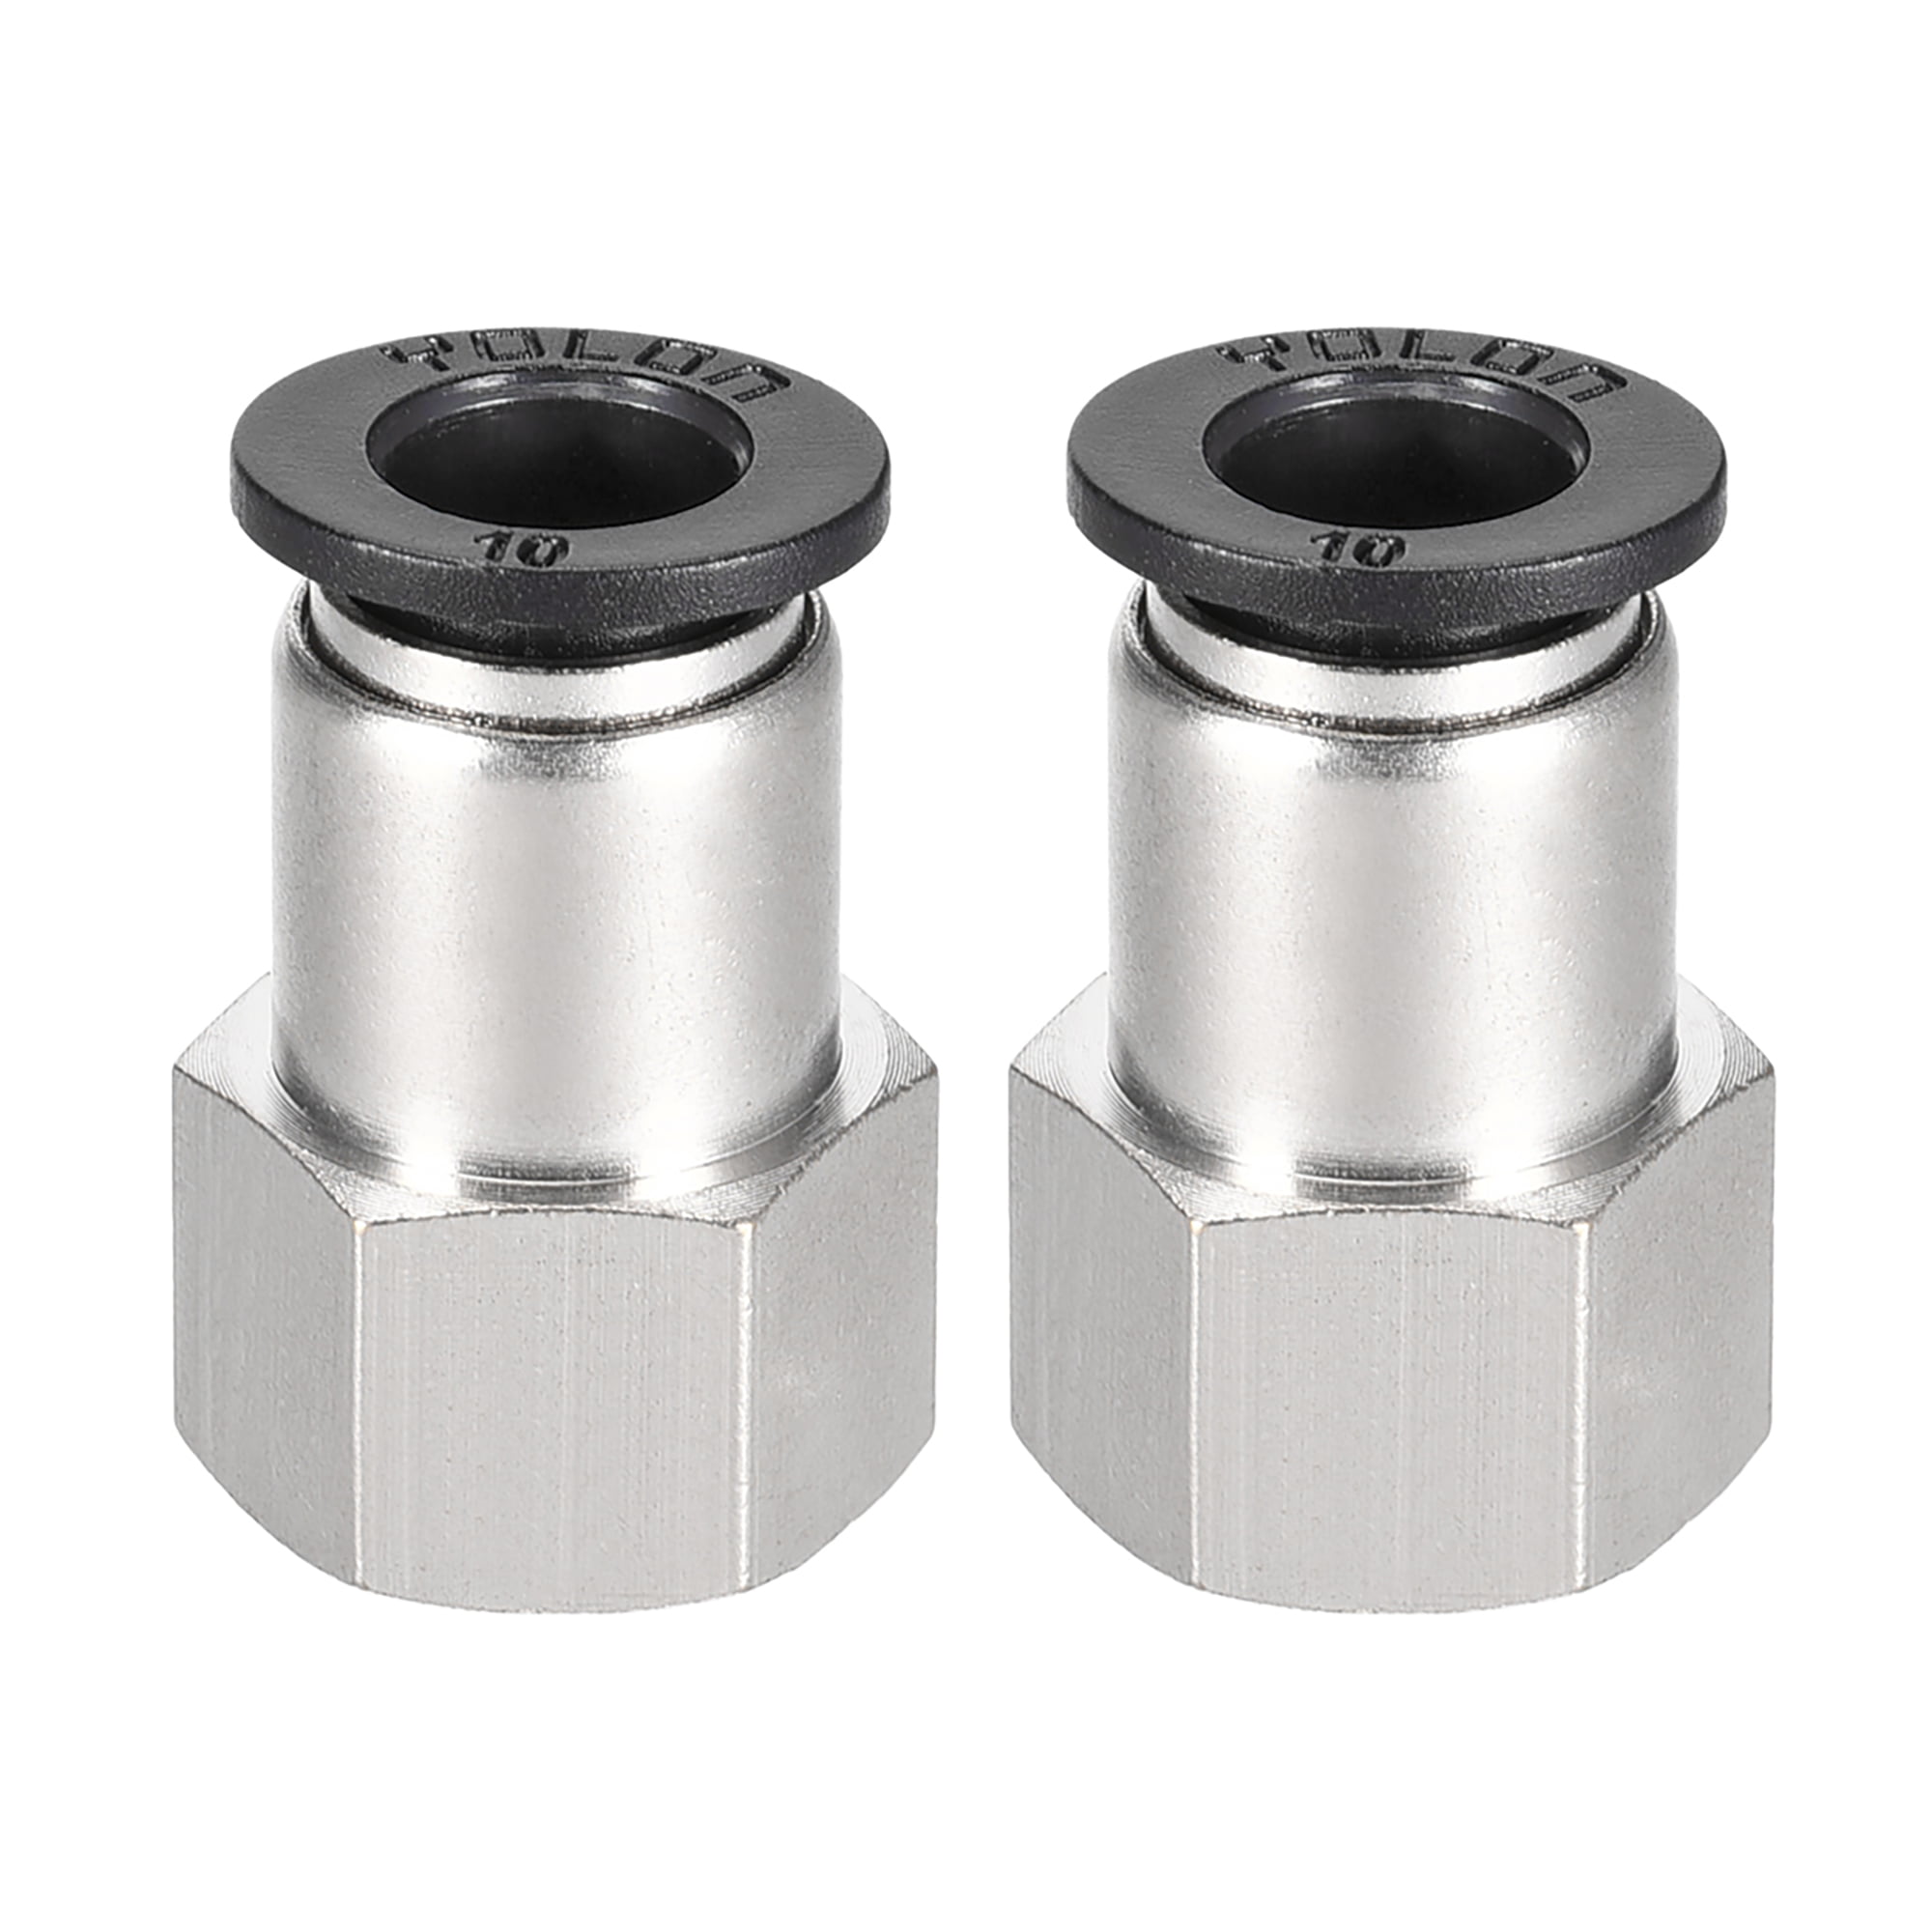 uxcell Push to Connect Tube Fitting Adapter 6mm Tube OD X 1/8 PT Female Straight Pneumatic Connecter Pipe Fitting 4pcs 